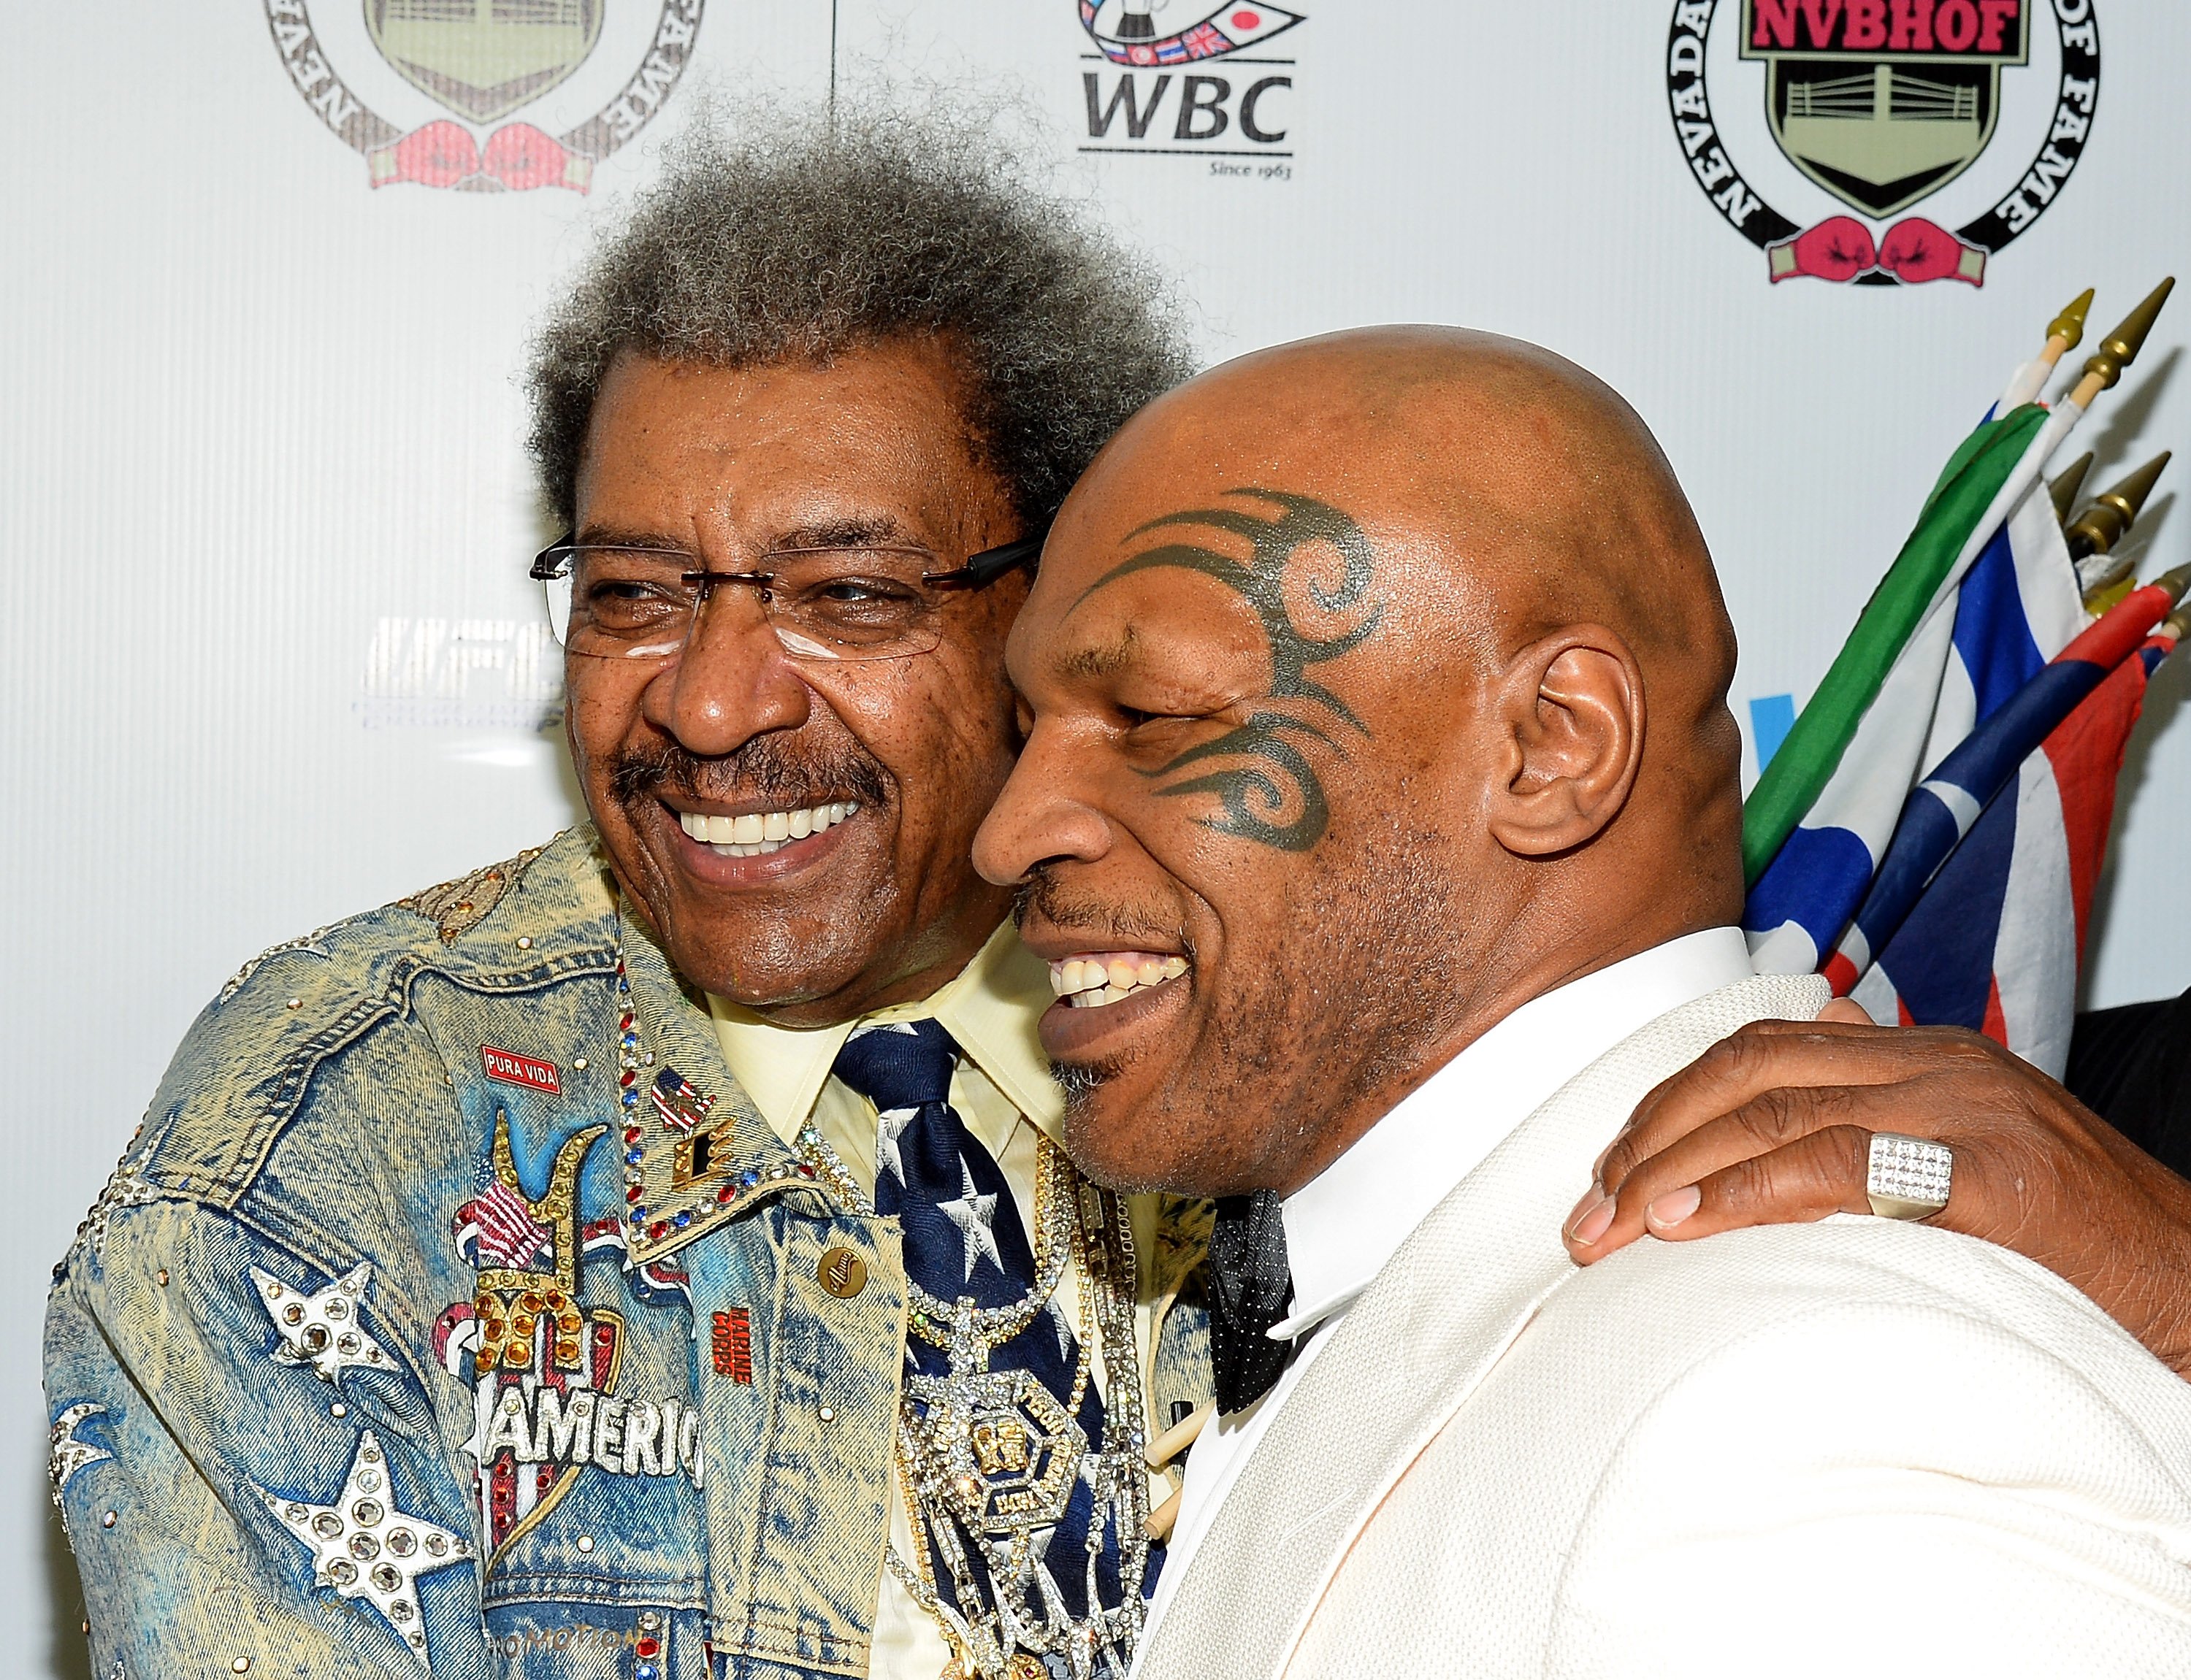 Boxing promoter and inductee Don King (L) and former boxer and inductee Mike Tyson arrive at the Nevada Boxing Hall of Fame inaugural induction gala. | Source: Getty Images